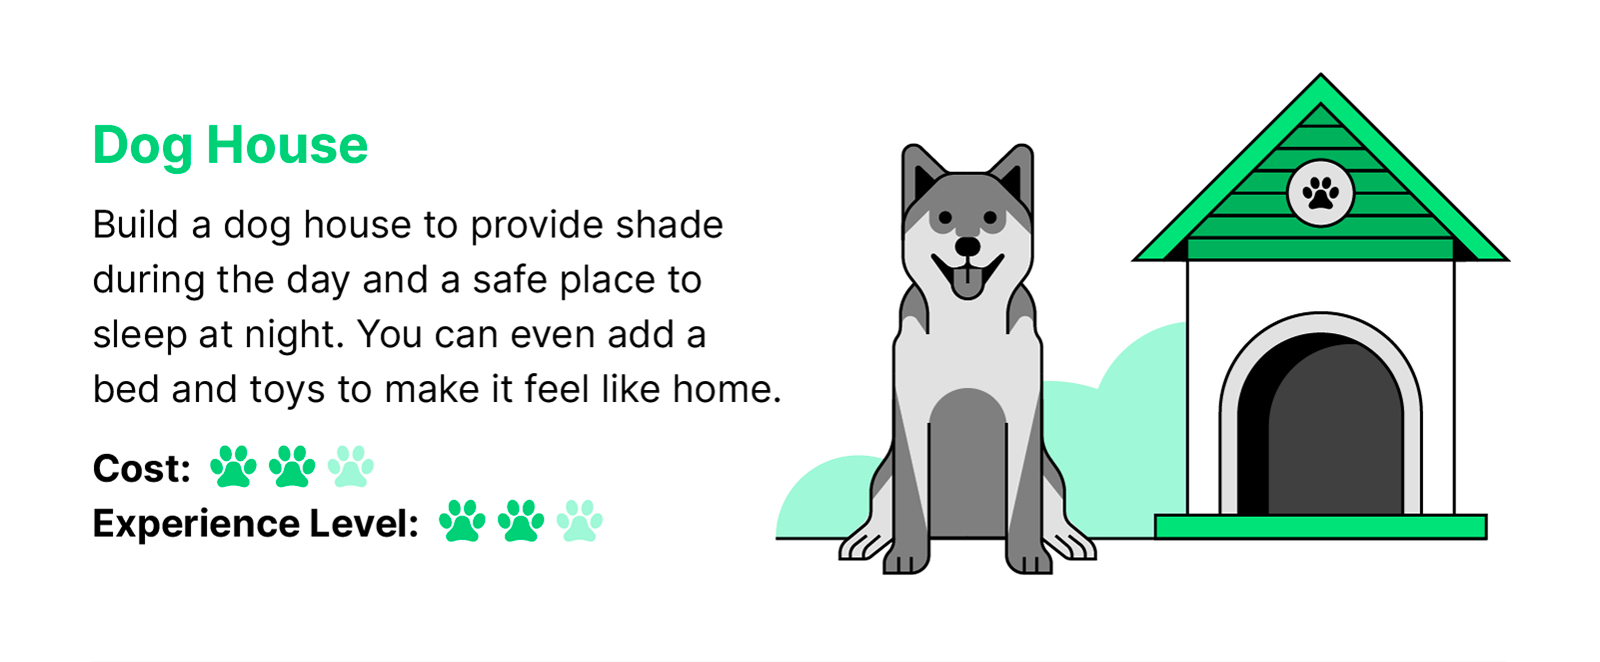 Green black and white illustration of a dog sitting next to a dog house with text